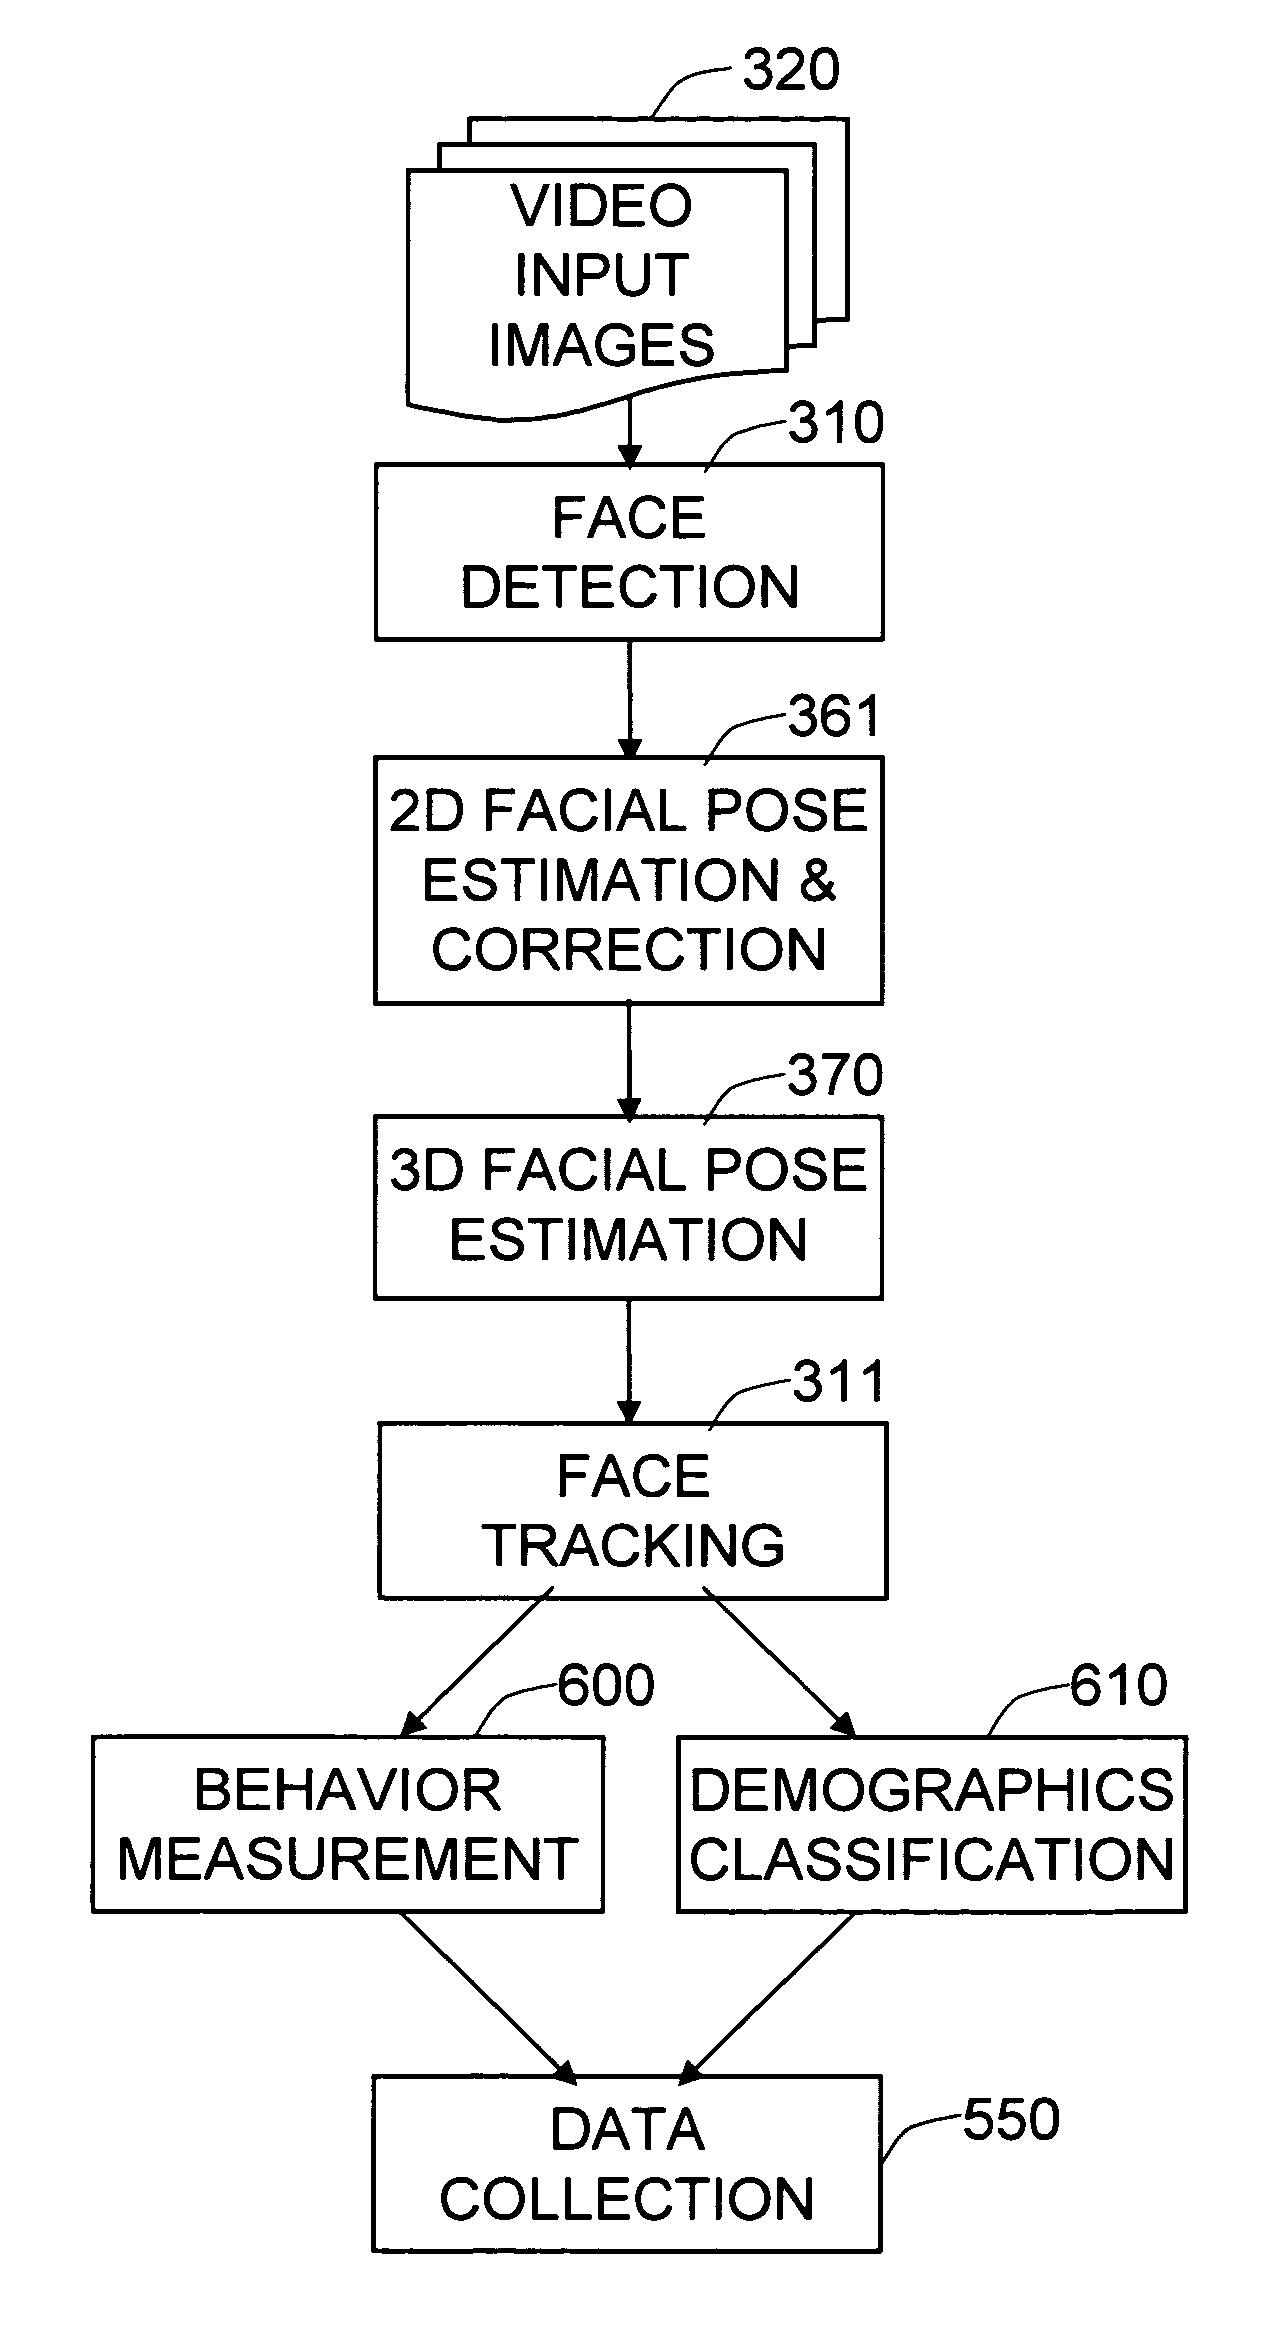 Automatic detection and aggregation of demographics and behavior of people